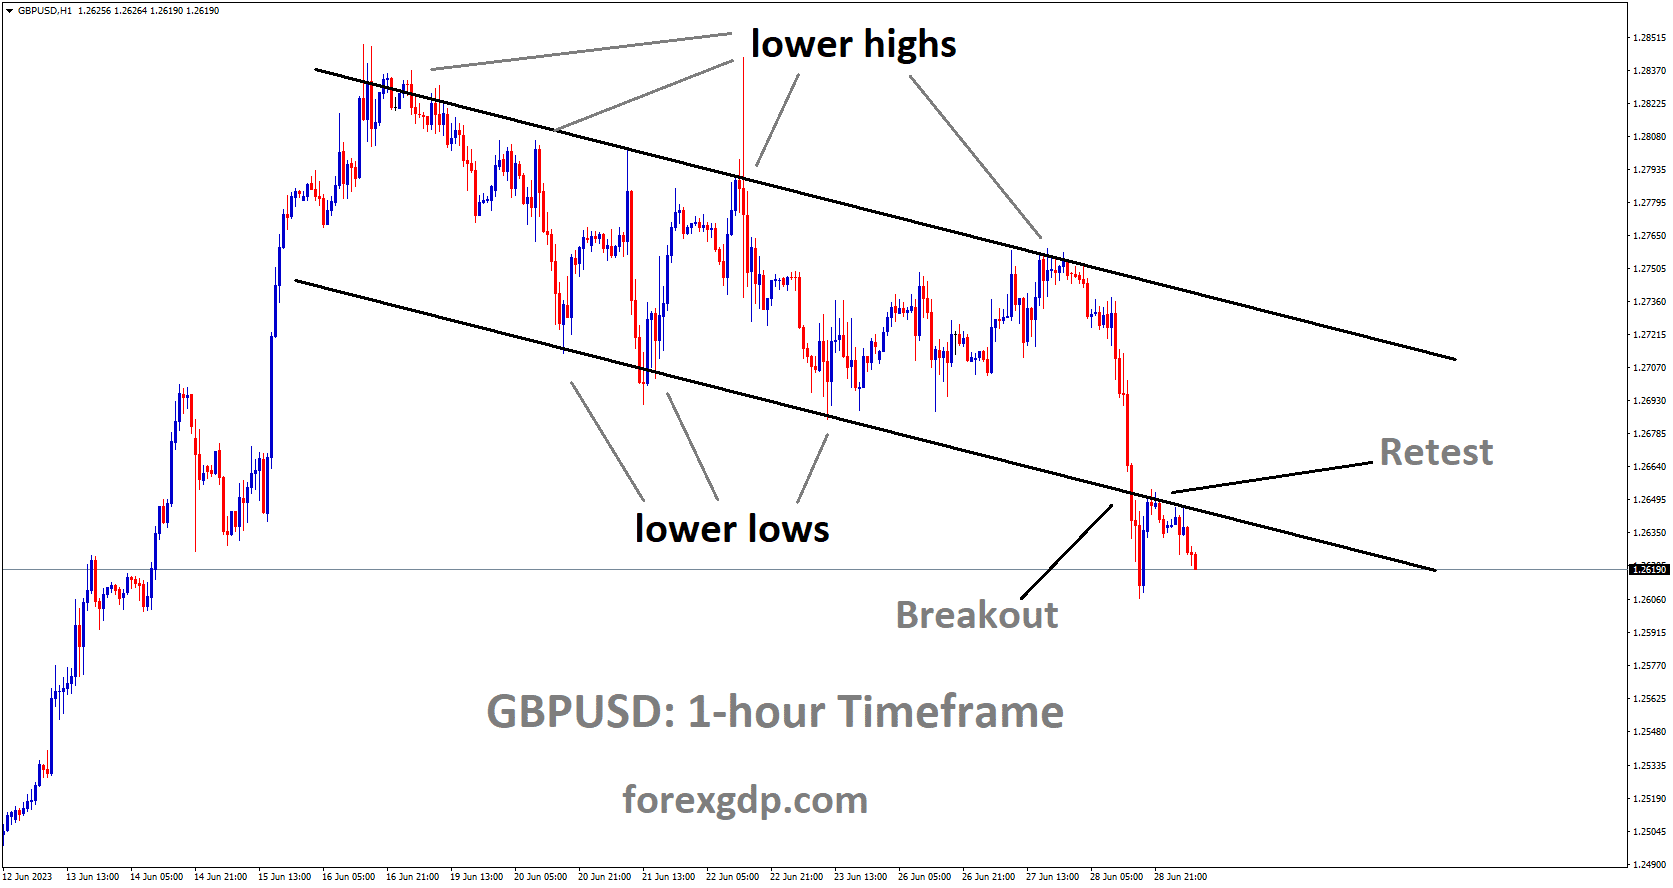 GBPUSD has broken the descending channel and retested the lower low area of channel.